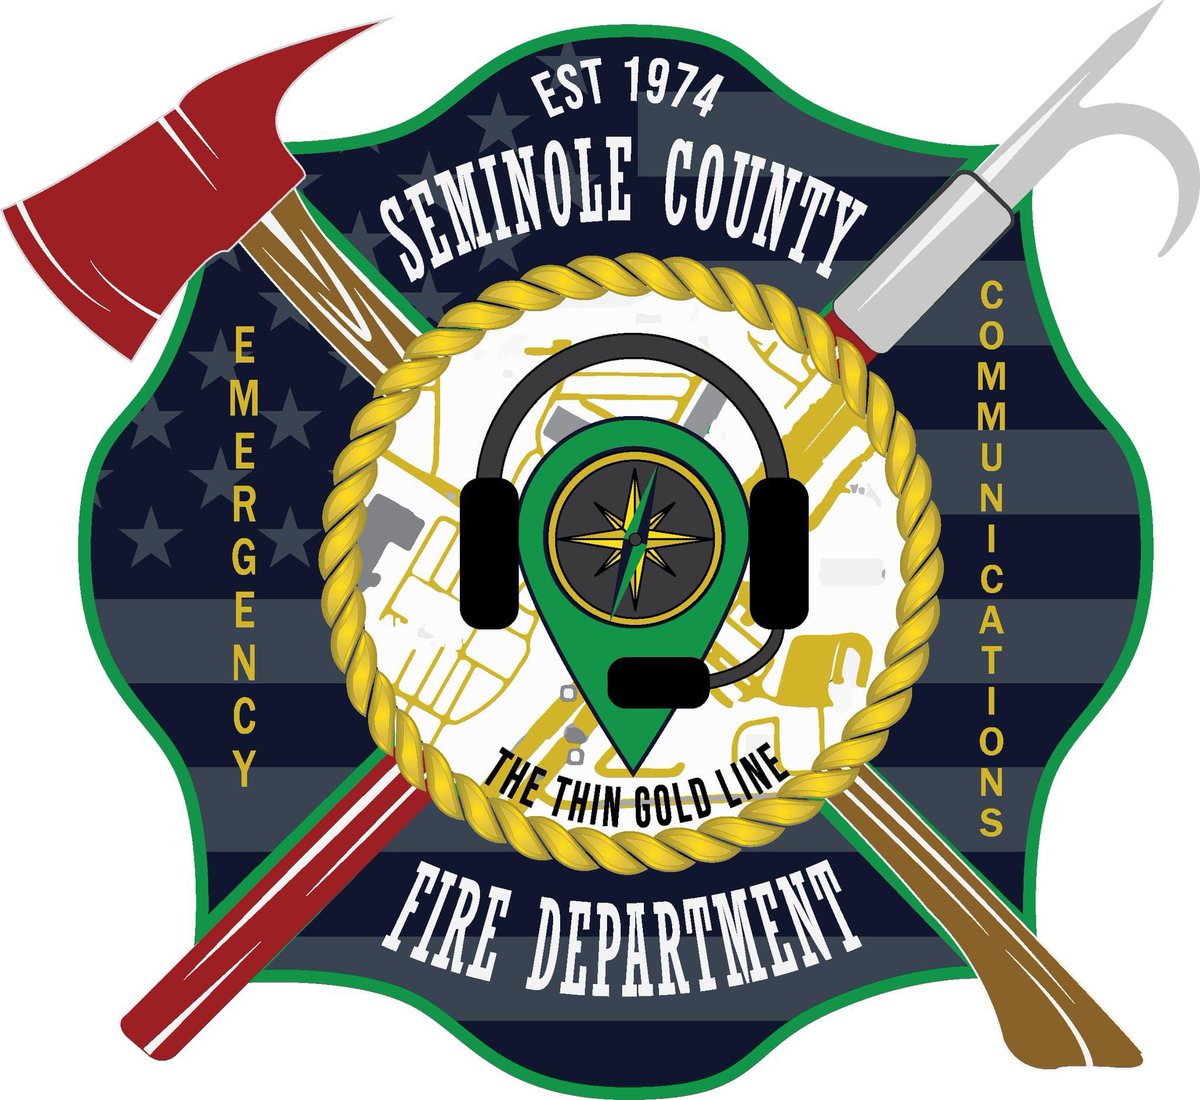 Today is the start of #NationalTelecommunicatorsWeek. It is the perfect day to debut the new logo for the SCFD Communications Center. This new logo was designed by @SeminoleState Marina Crossman. Also pictured is Michael Kappers, Digital Media Program Manager.